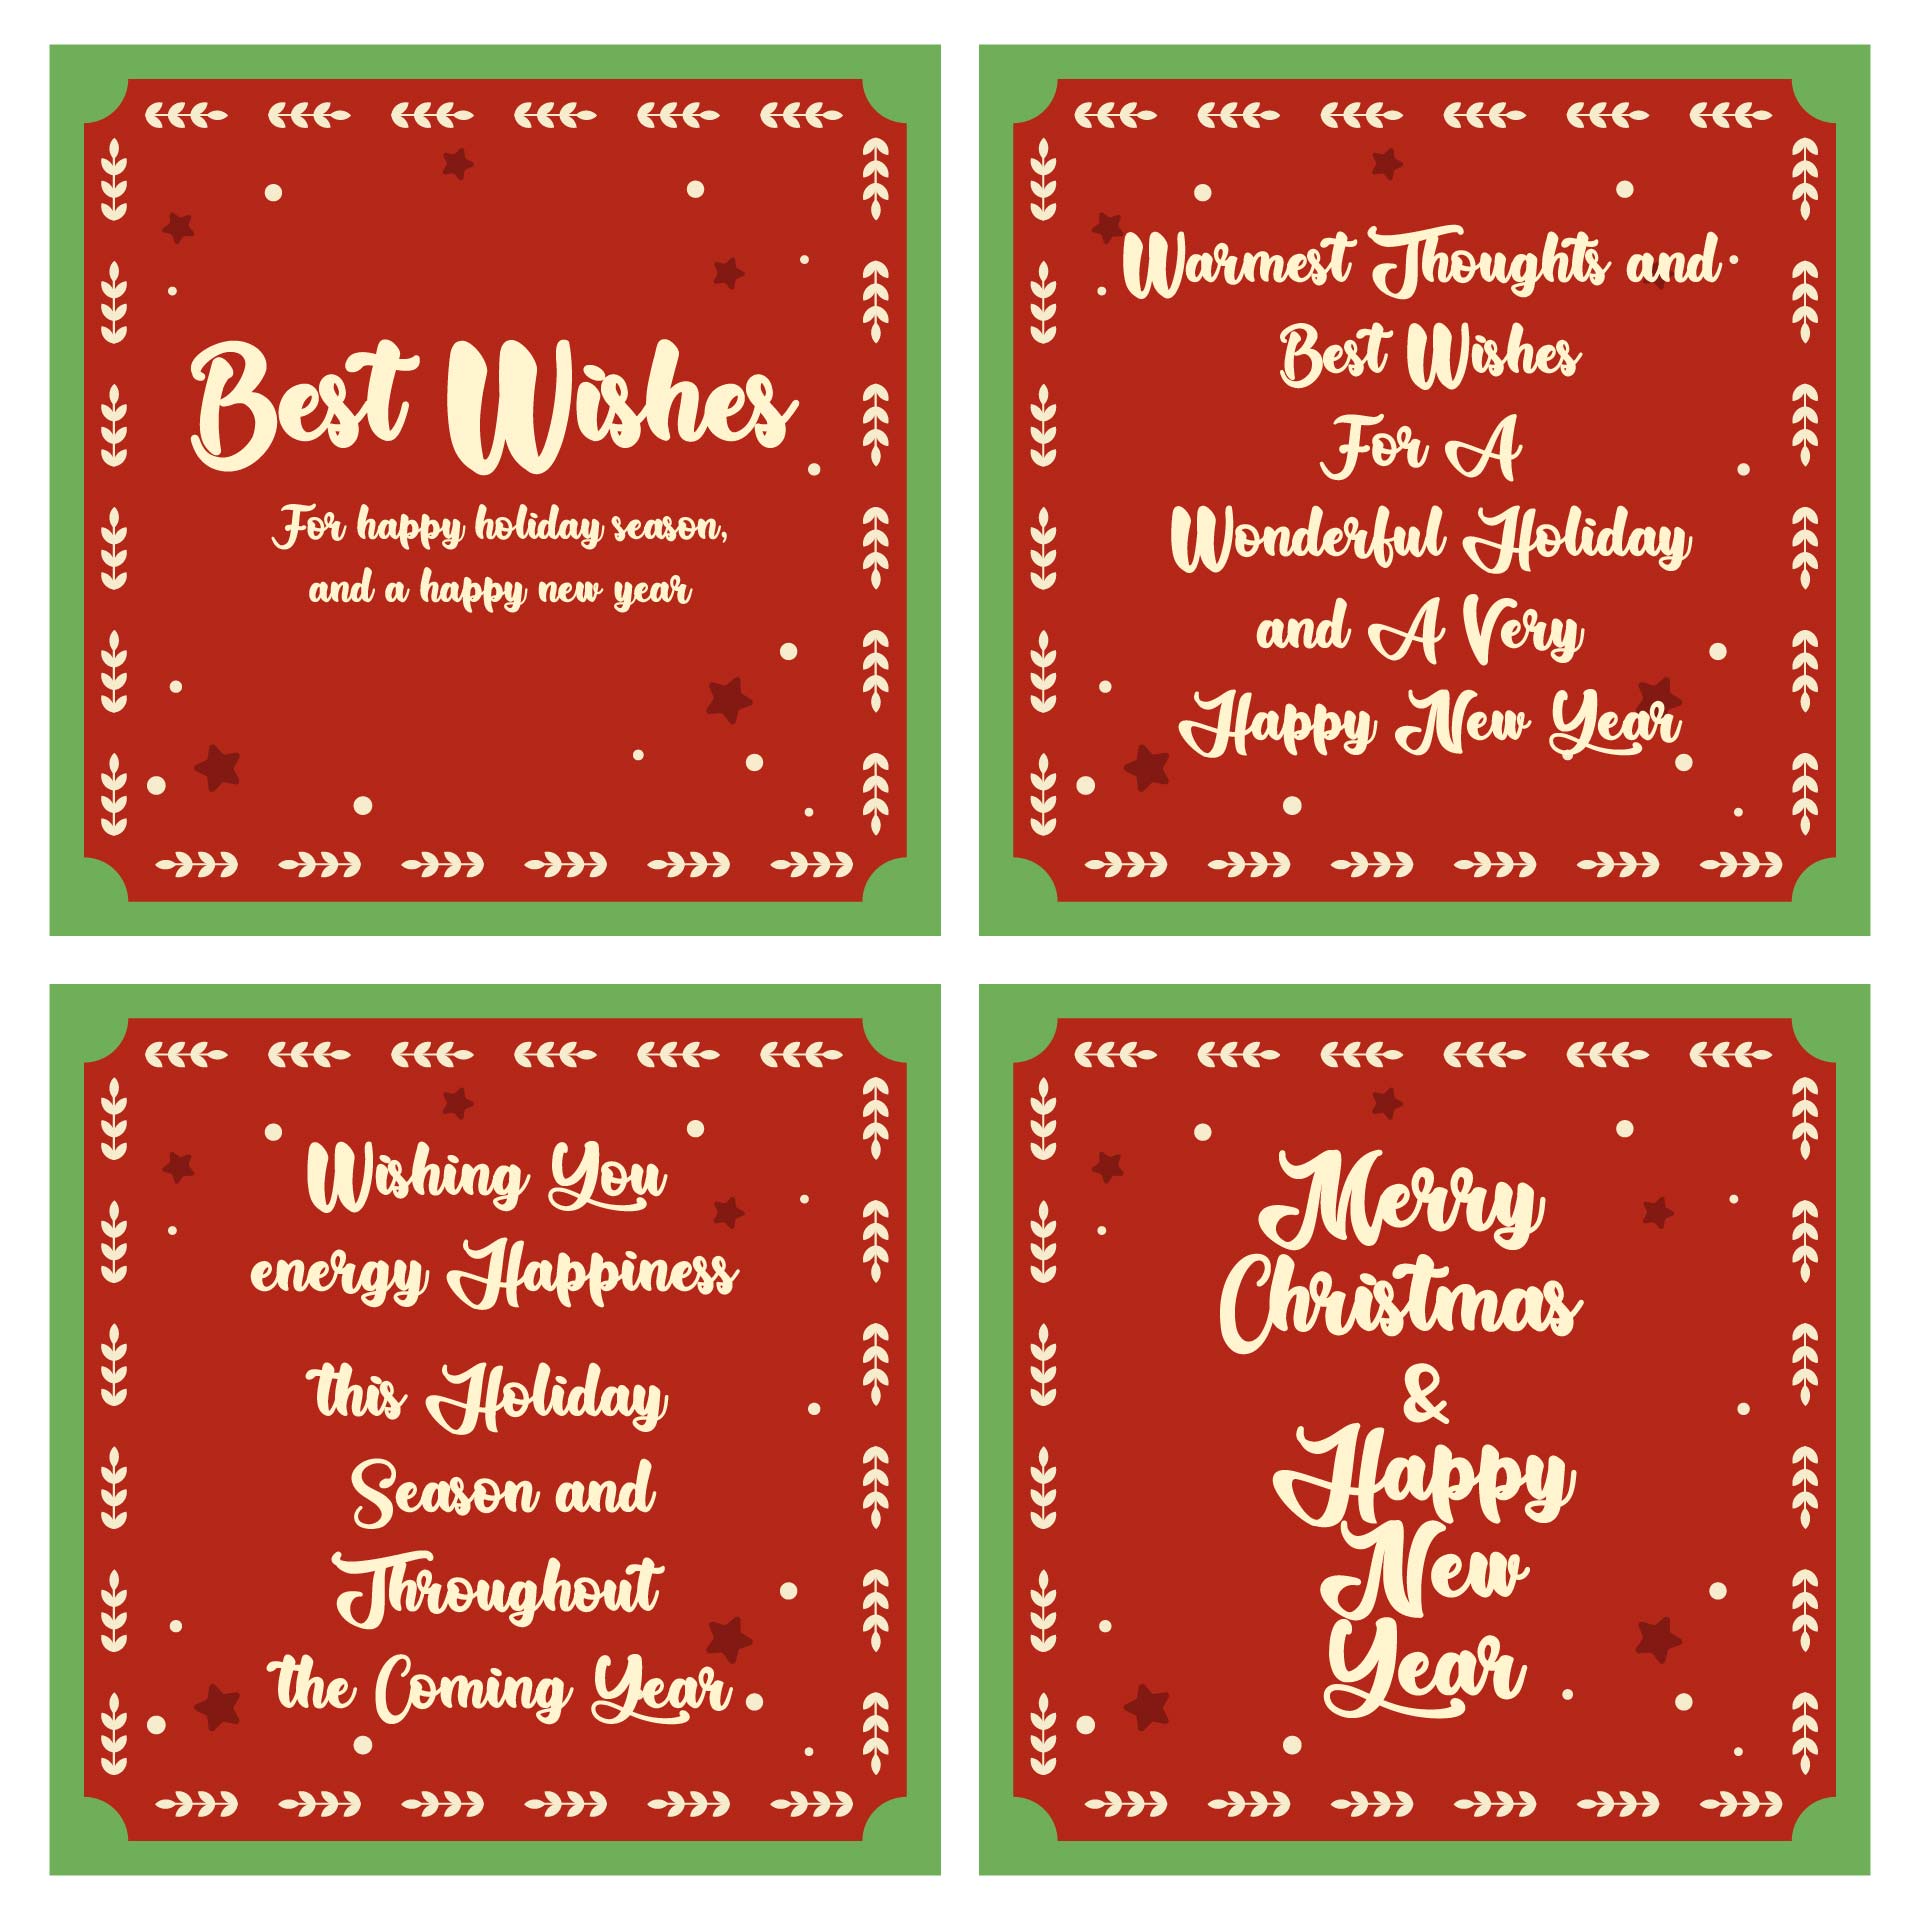 peel-off-family-christmas-verses-3-sticky-verses-for-cards-and-crafts